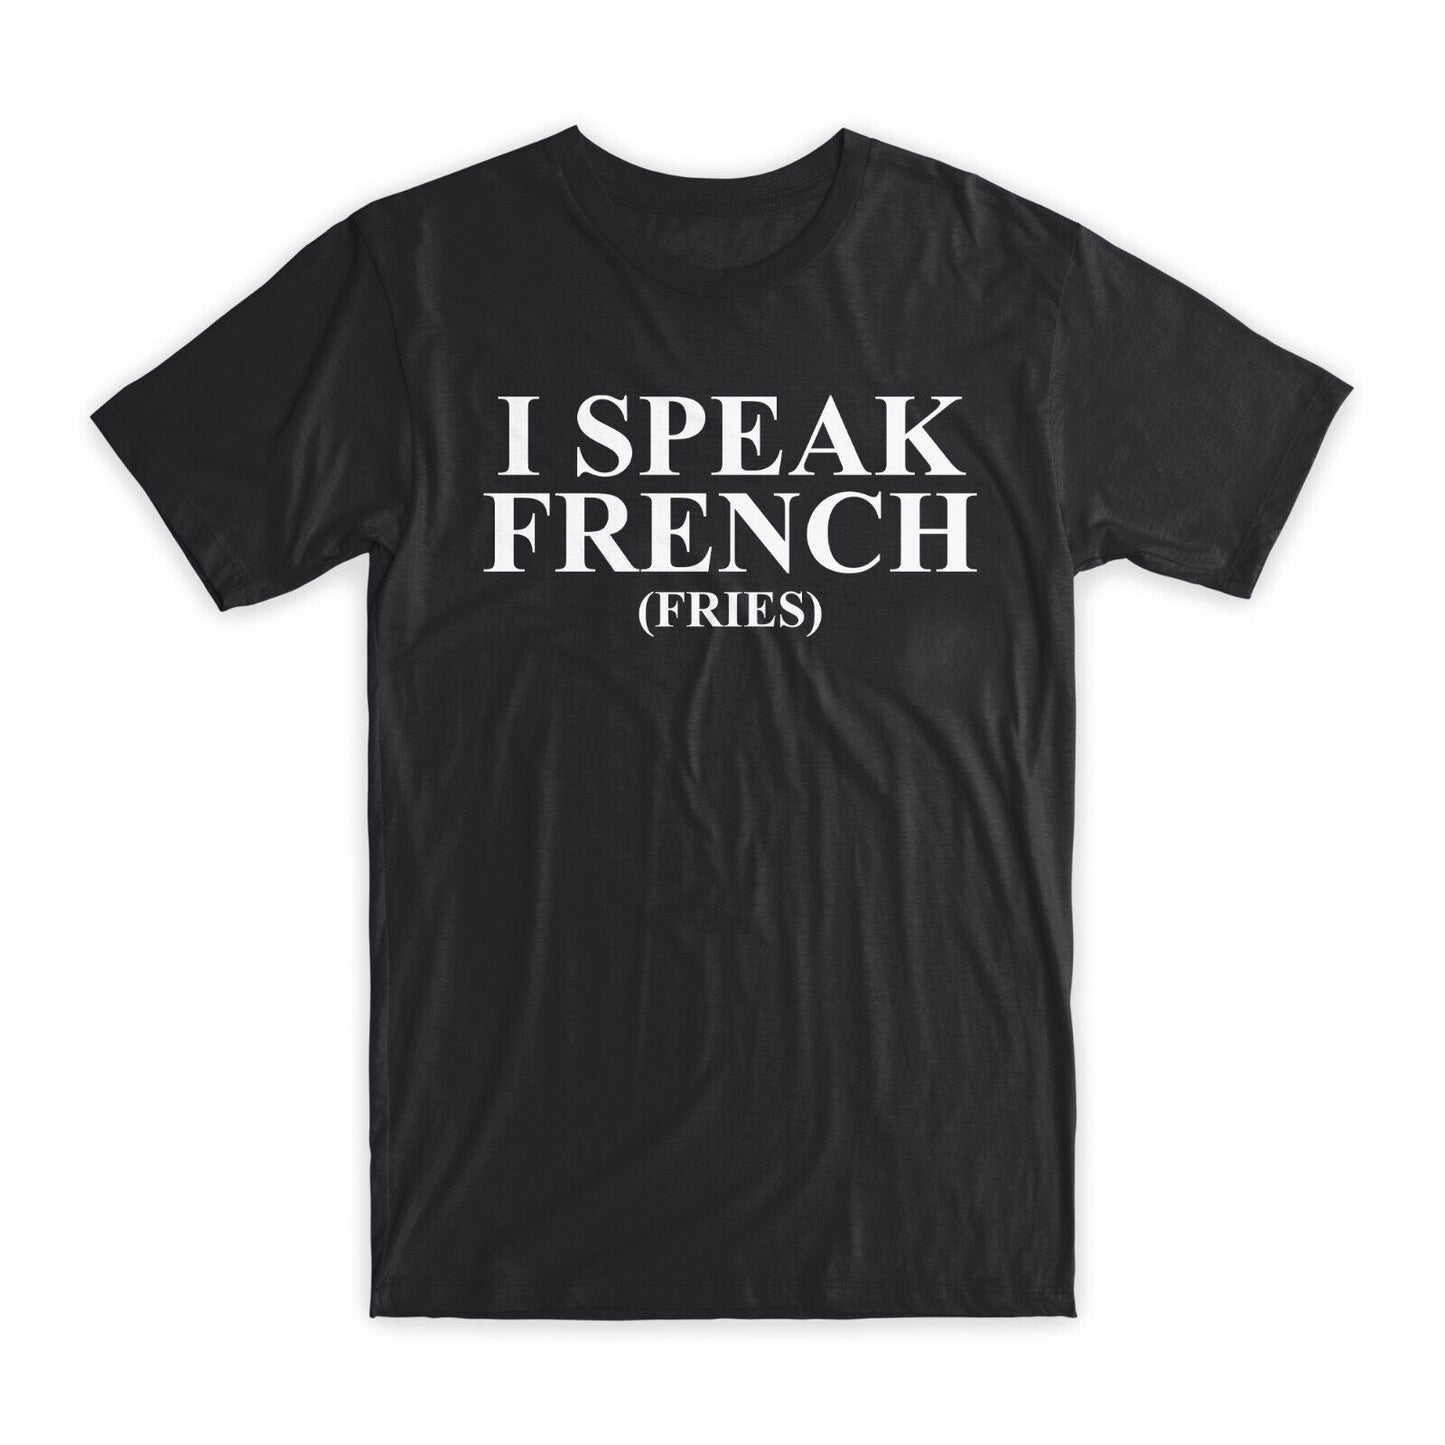 I Speak French Fries T-Shirt Premium Soft Cotton Crew Neck Funny Tees Gifts NEW